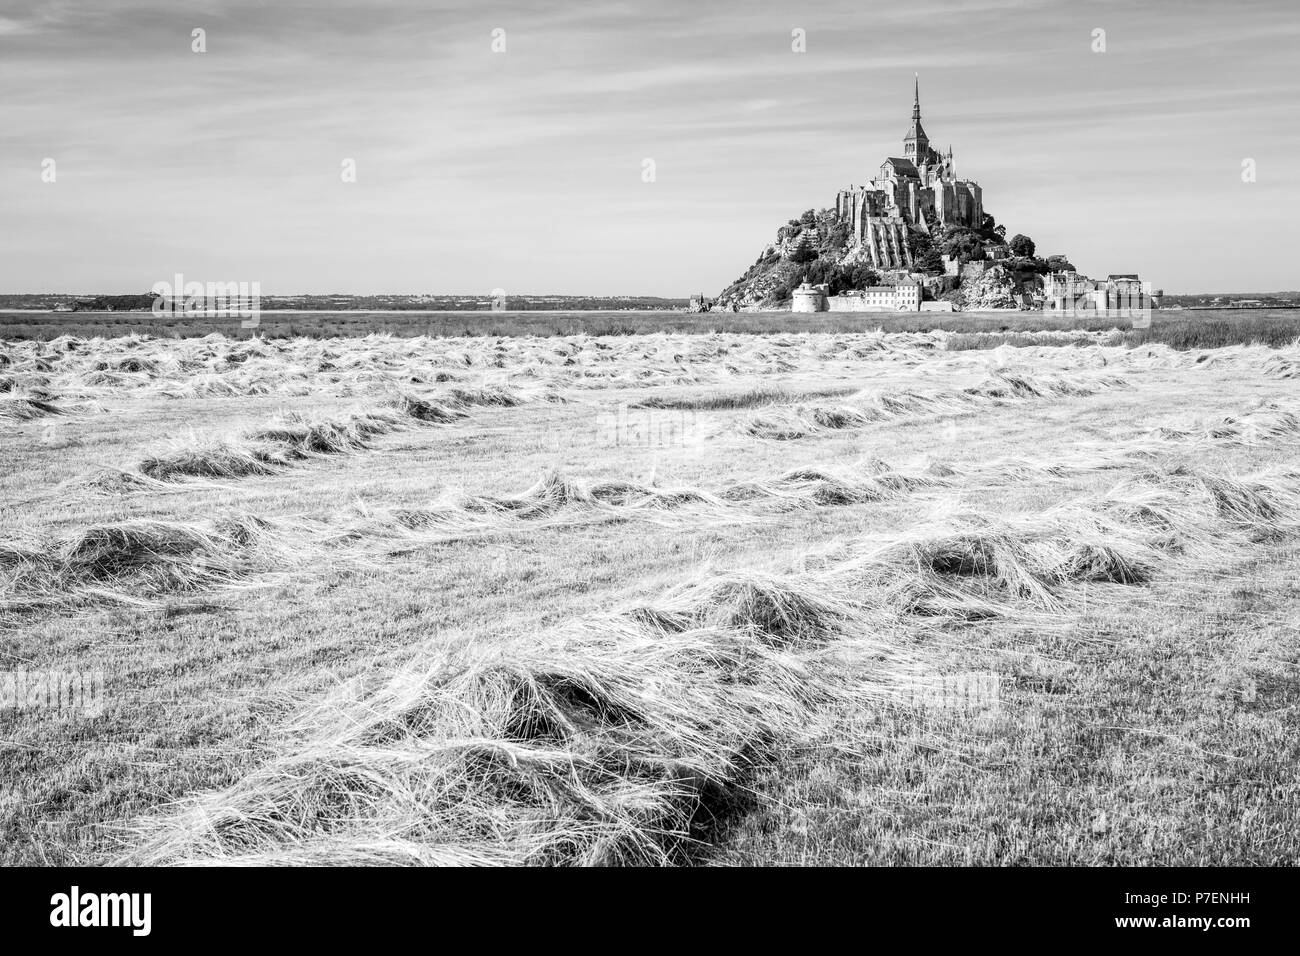 The Mont Saint-Michel tidal island in Normandy, France, with hay windrows drying in a field in the foreground under a blue sky with fibrous clouds. Stock Photo